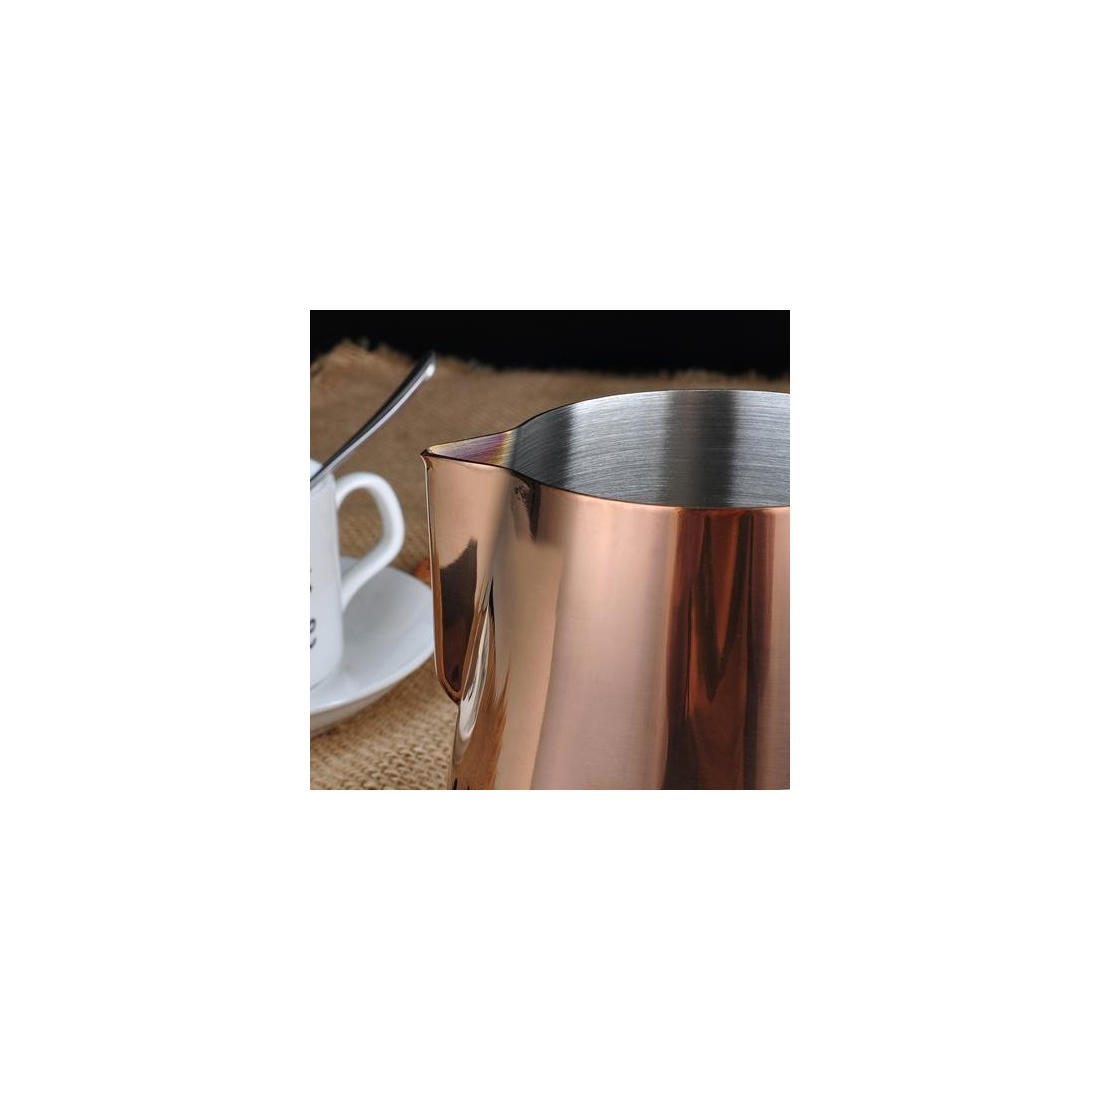 Barista Space (F16) Stainless Steel Rose Gold Milk Pitcher 600ml|mkayn|مكاين